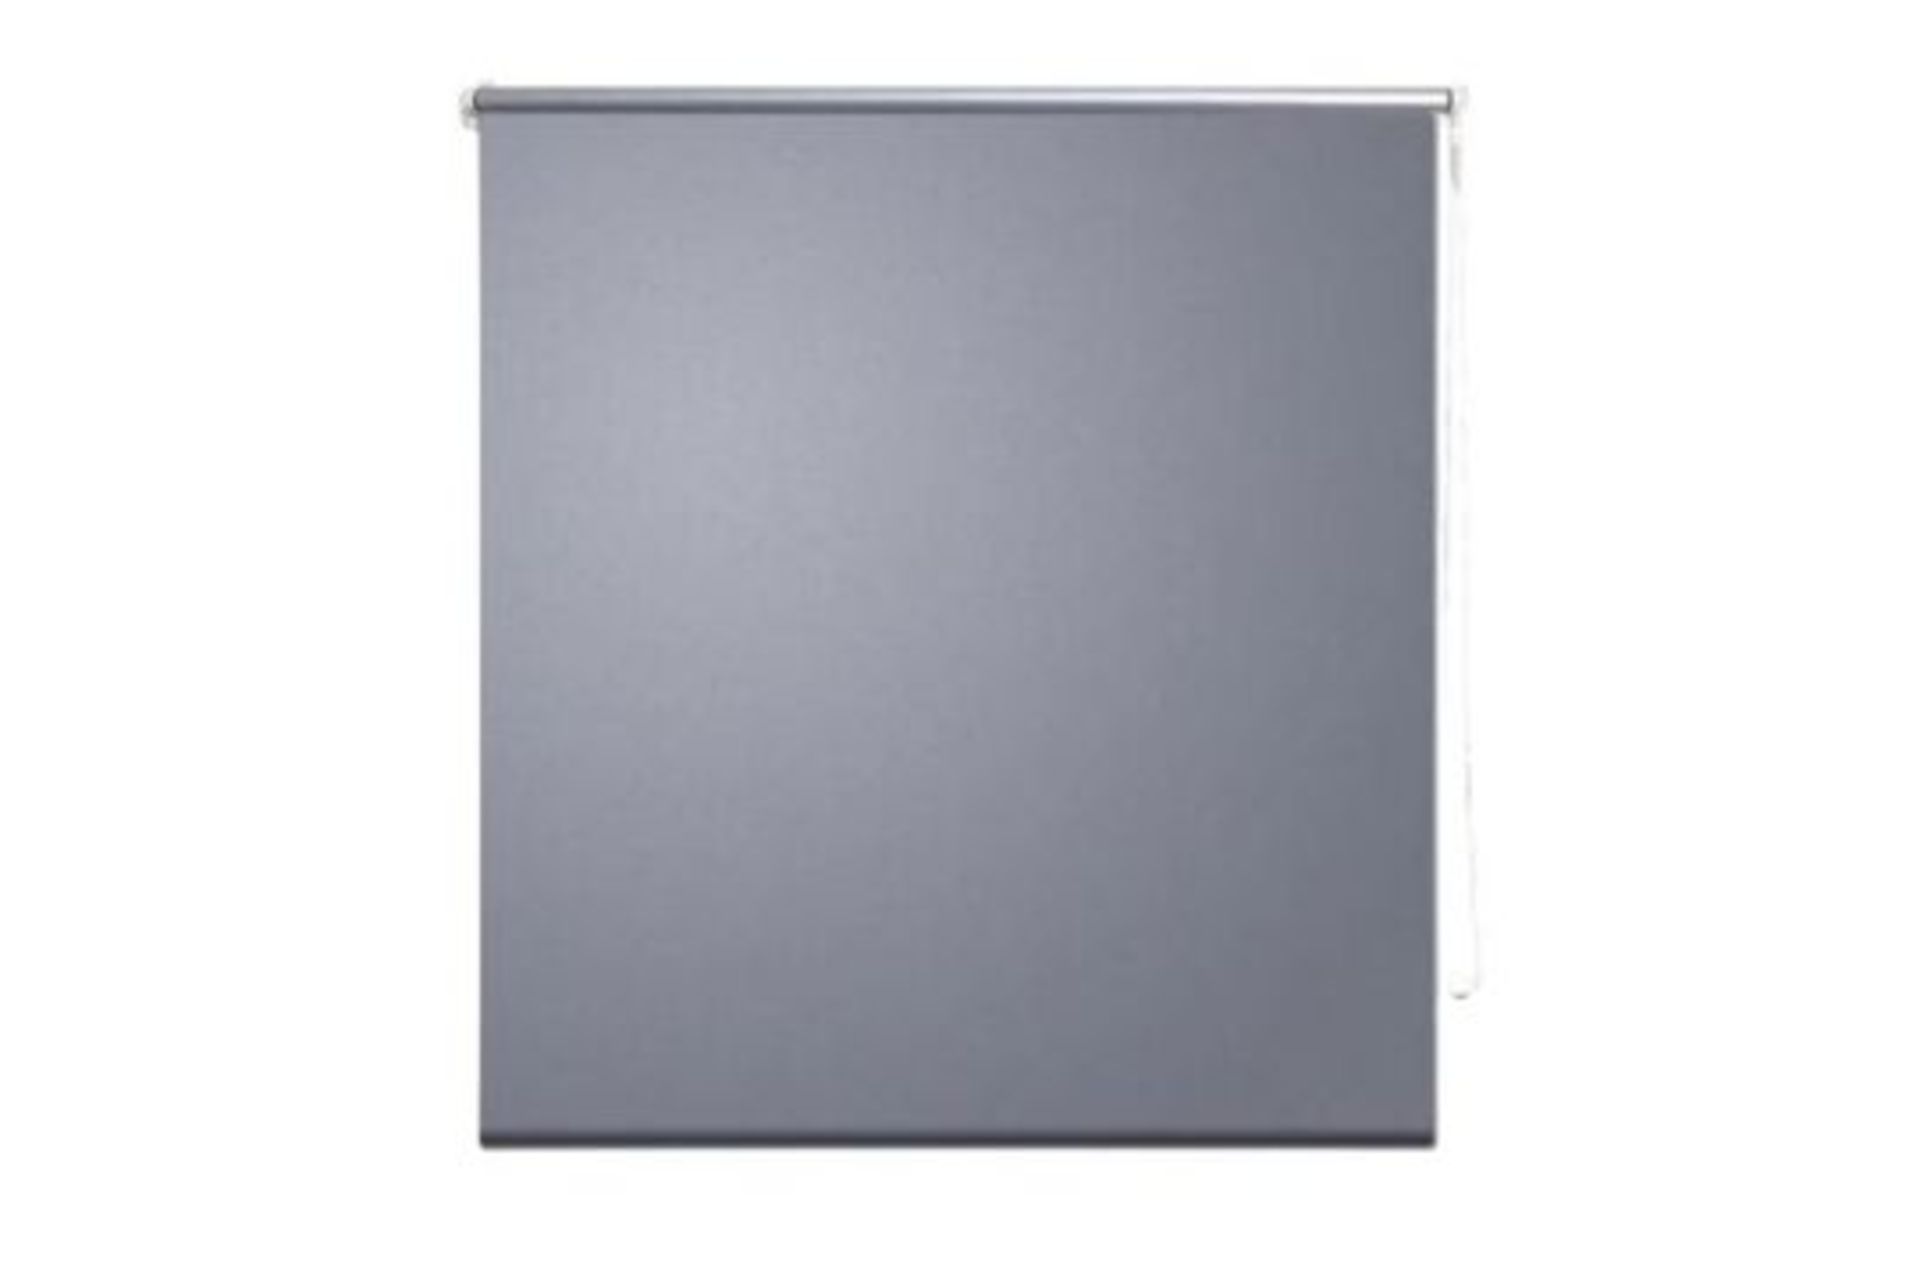 Roller Blind Blackout 80 x 175 cm Grey. - (r51). Blackout roller blinds are a perfect solution for